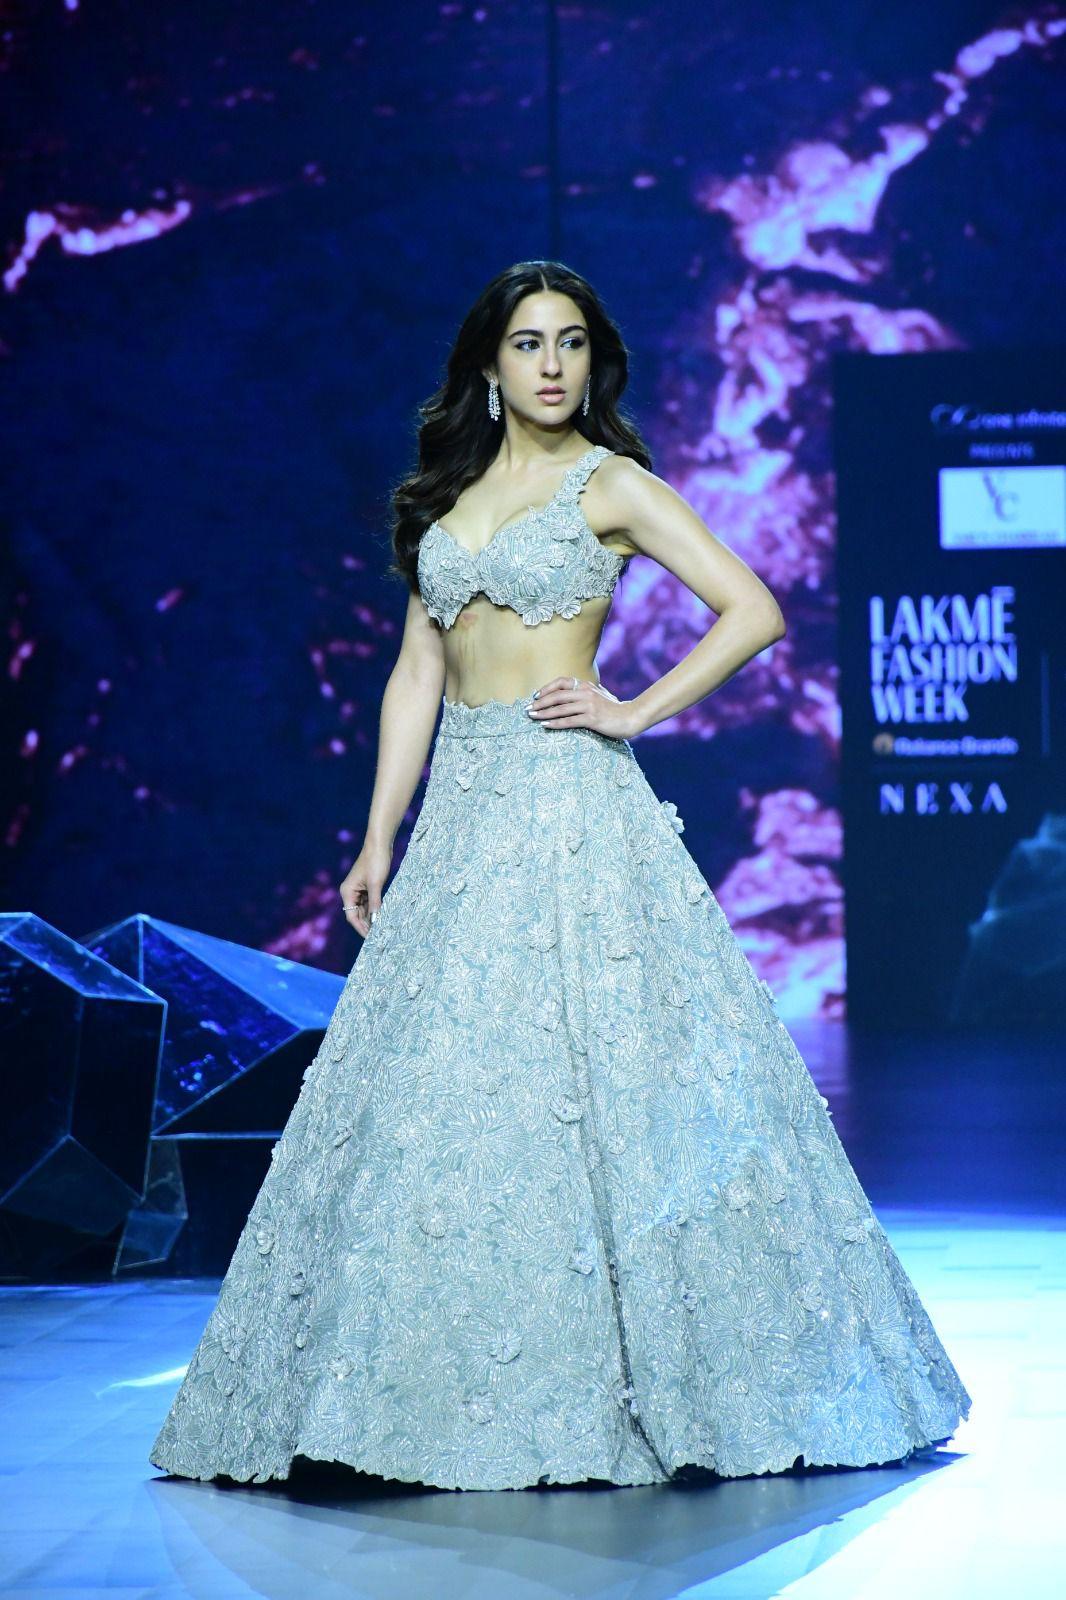 Sara looked absolutely stunning in a glitzy lehenga when she strutted down the runway for designer Varun Chakkilam. The combination of traditional silhouettes and Sara's grace was a perfect match. 